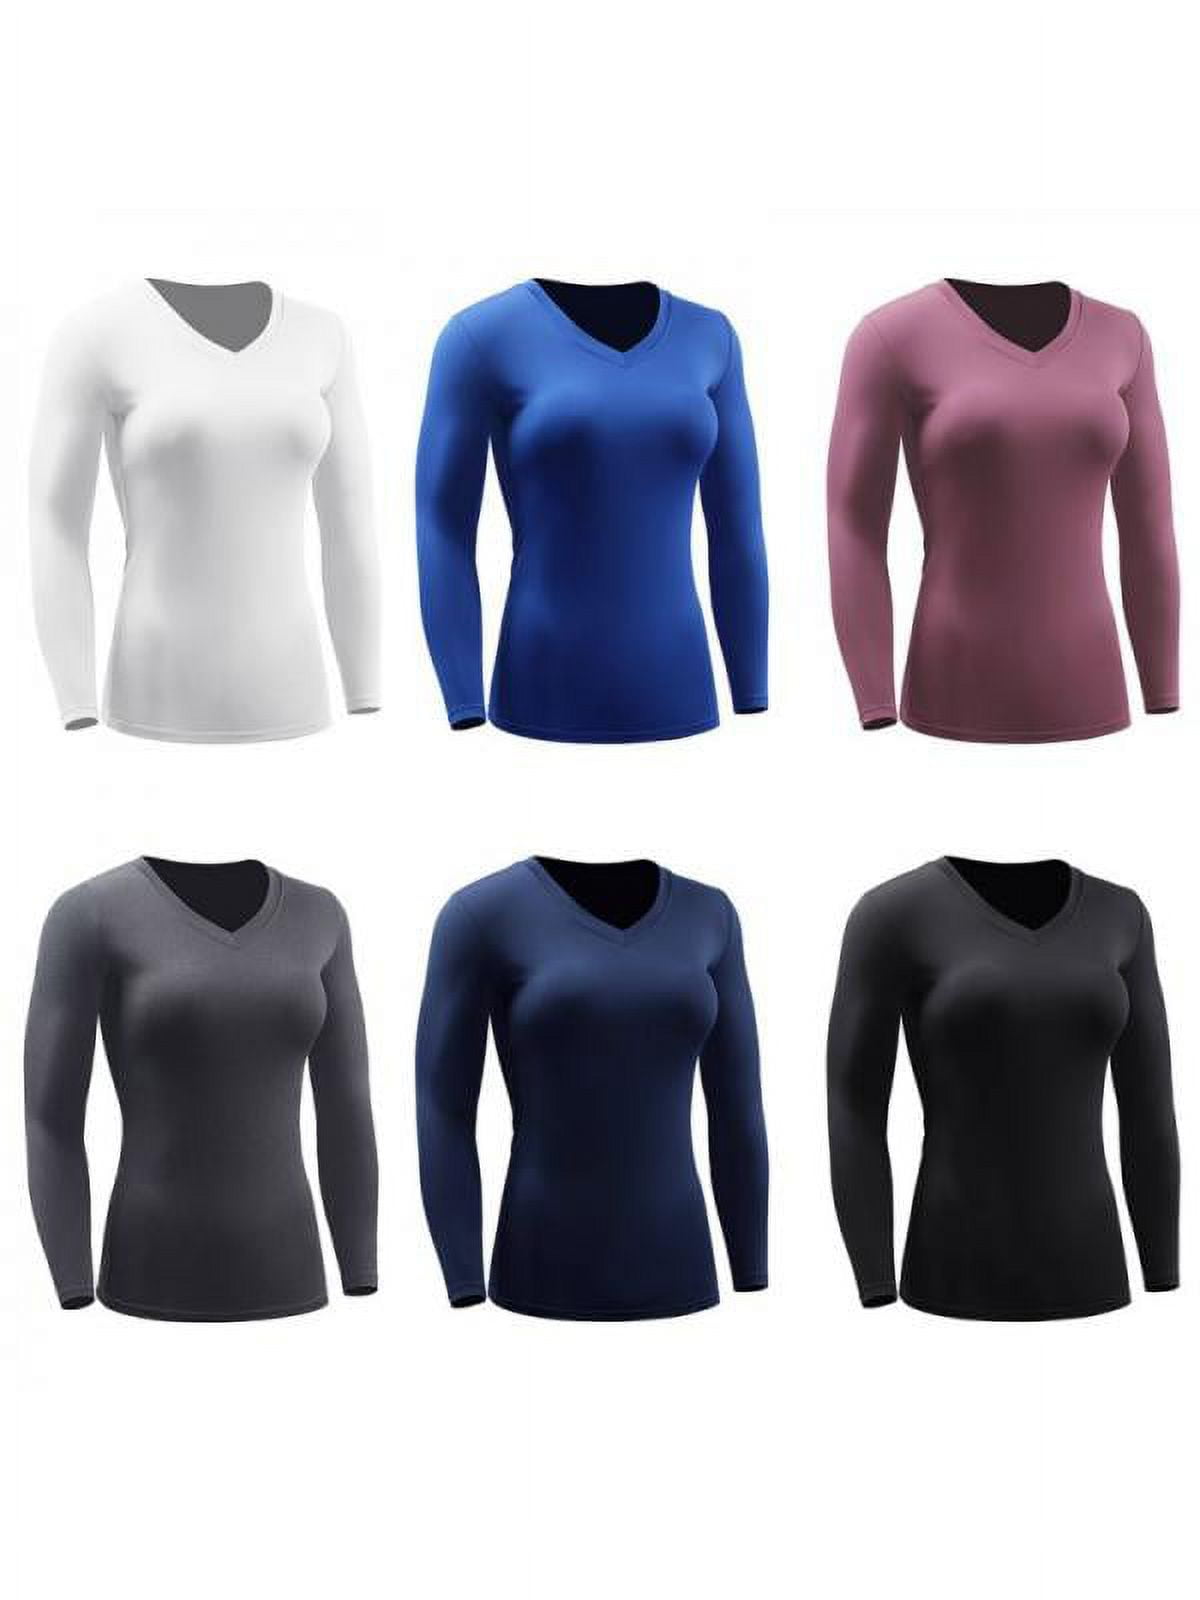 GOODLY Sports Tights Women Fitness T-shirts Running Long-sleeved ...